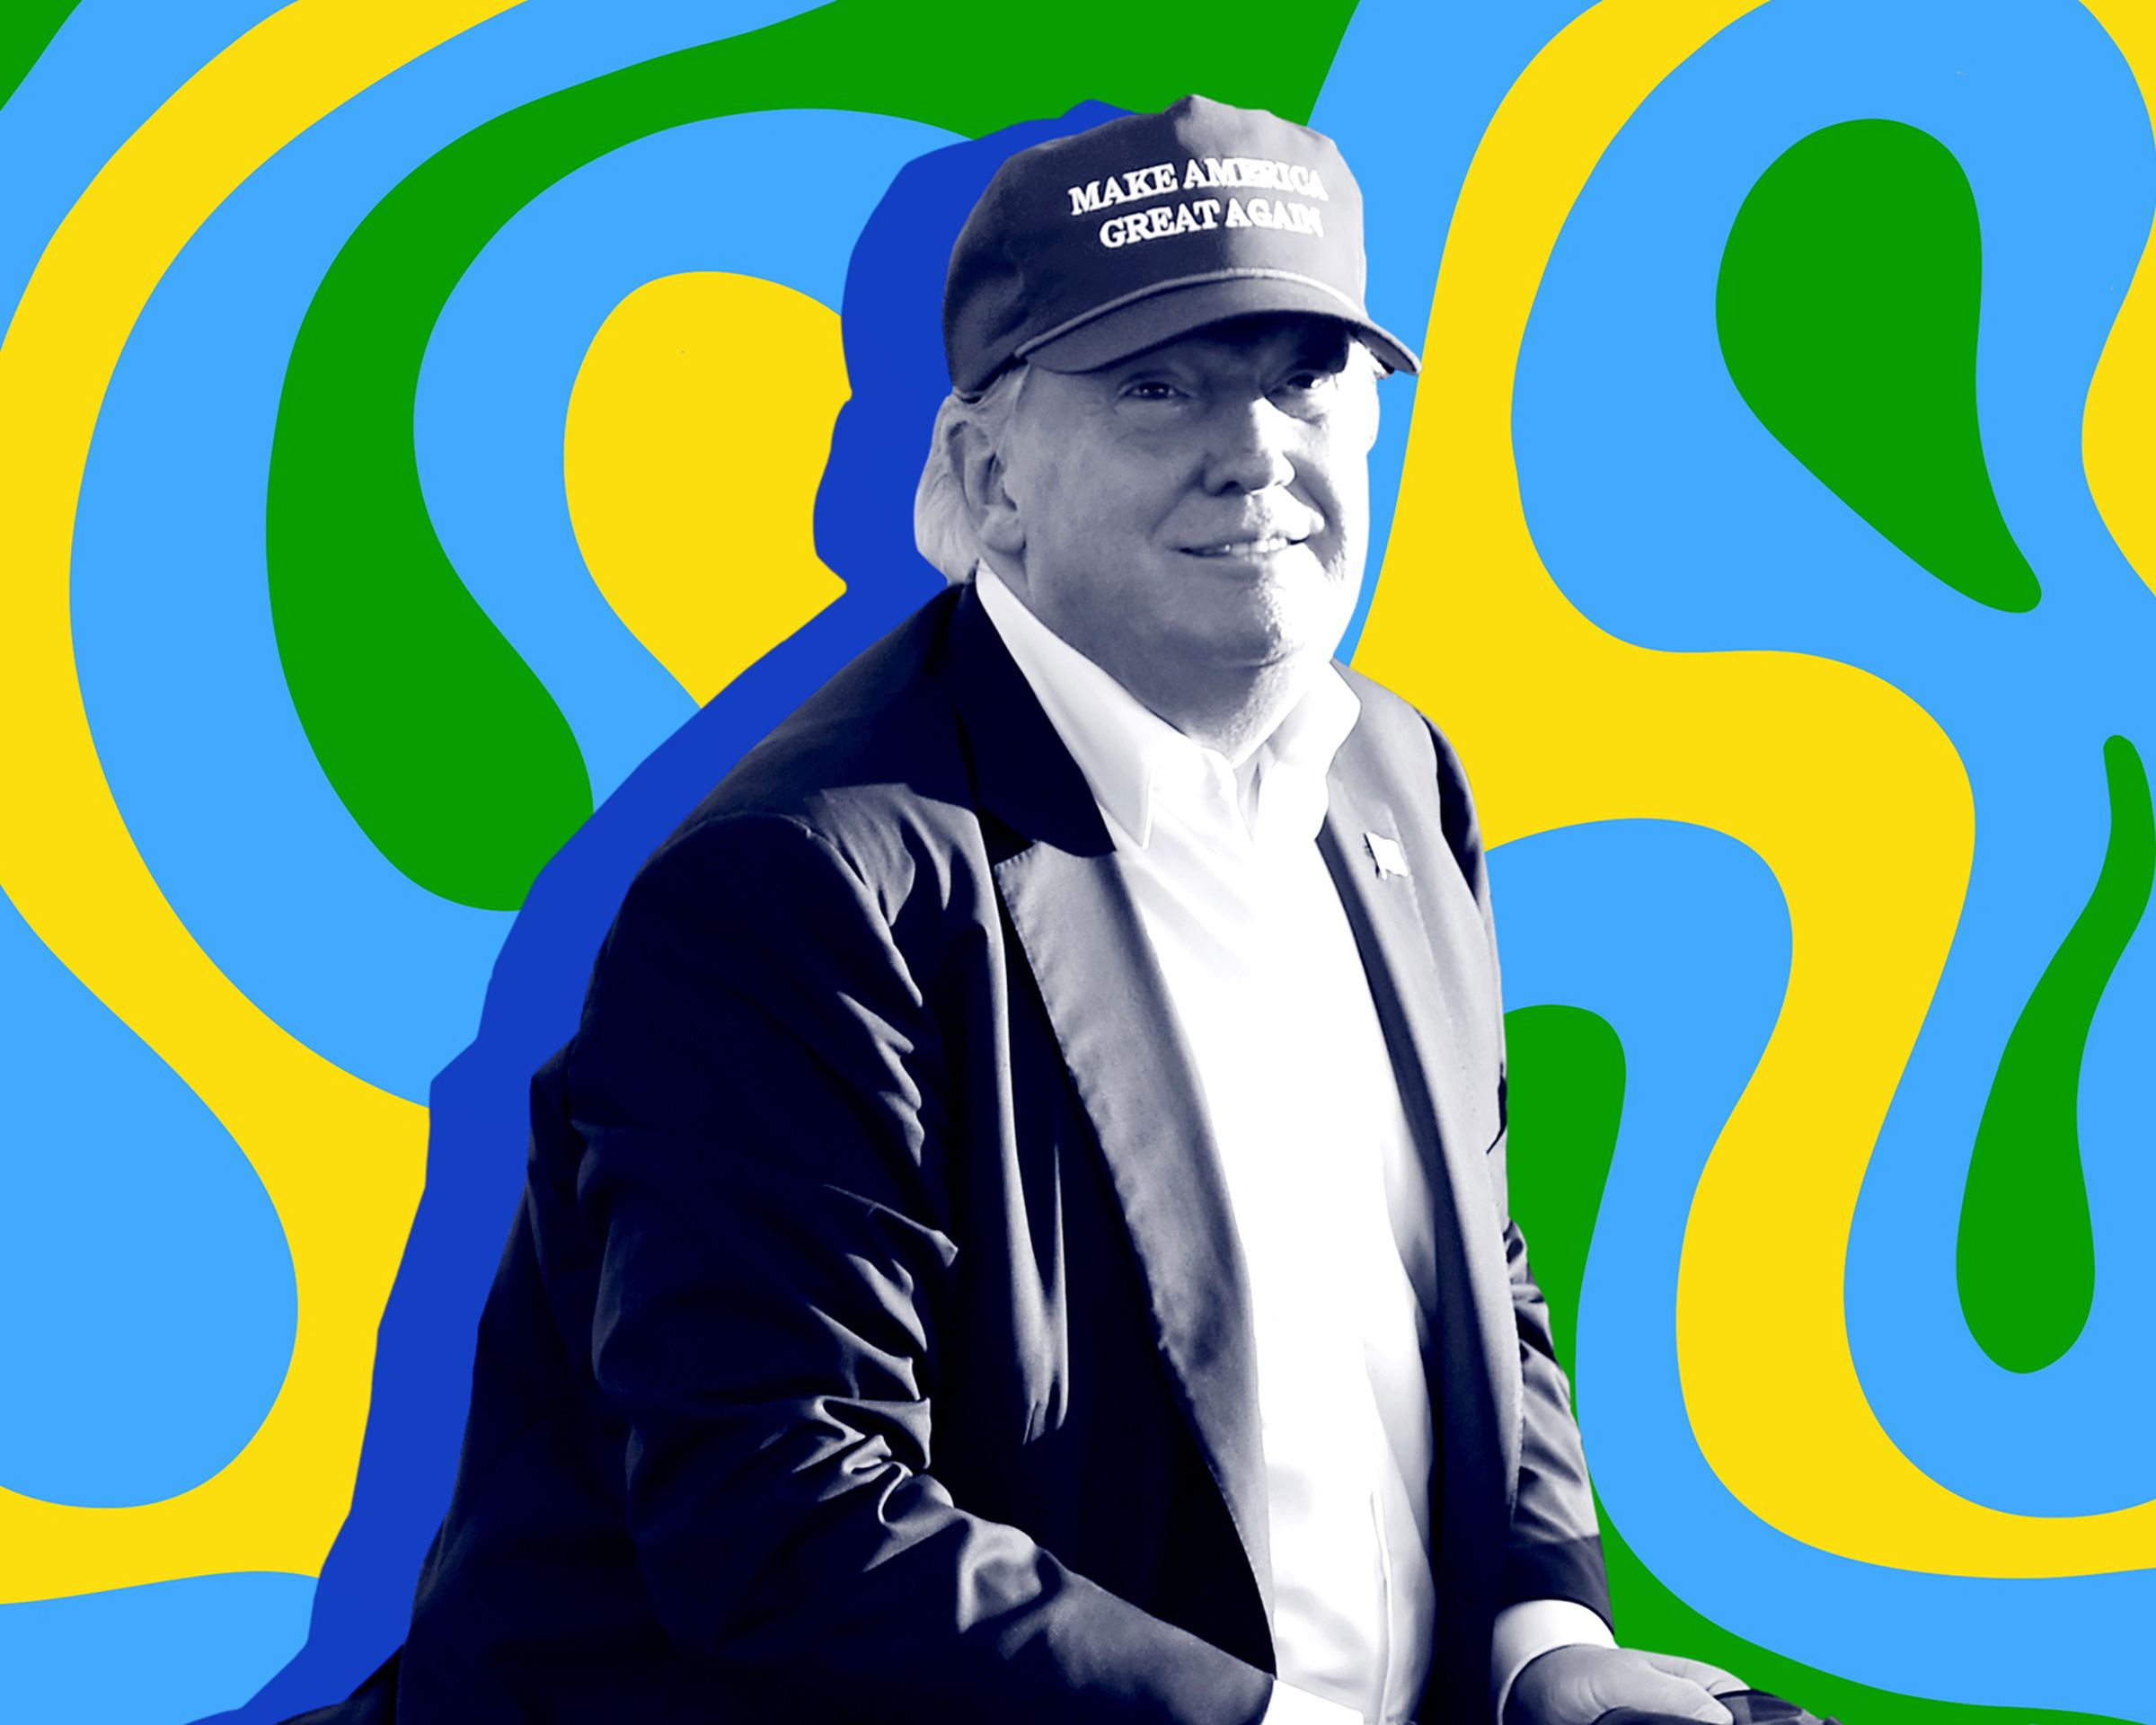 A picture of Donald Trump in black and white, wearing a ball cap and jacket with a colorful blue, yellow, and green background with large swirly lines.